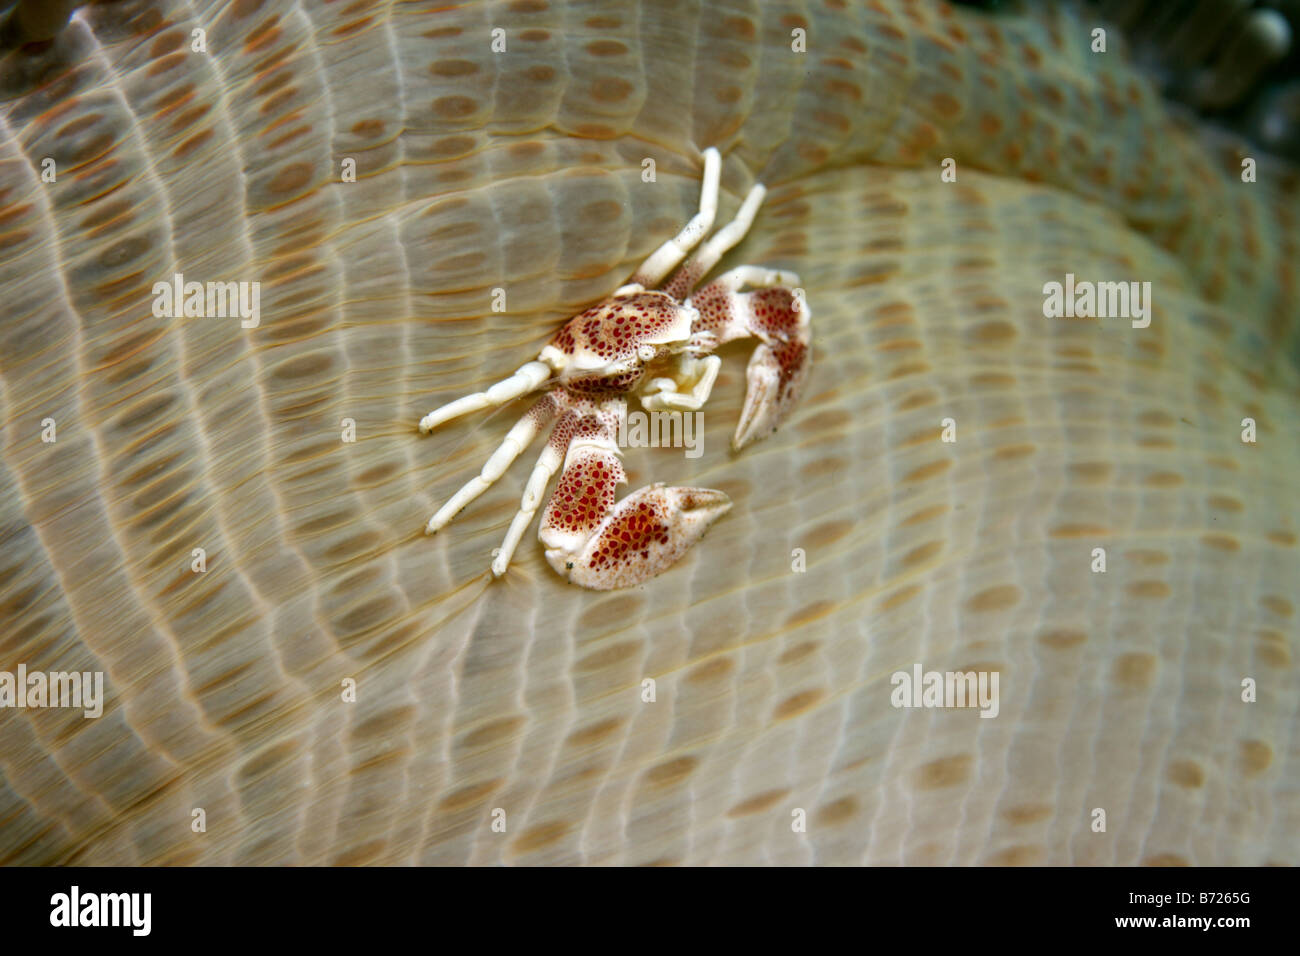 Anemone crab neopetrolisthes ohshima feeding on south pacific anenome Stock Photo